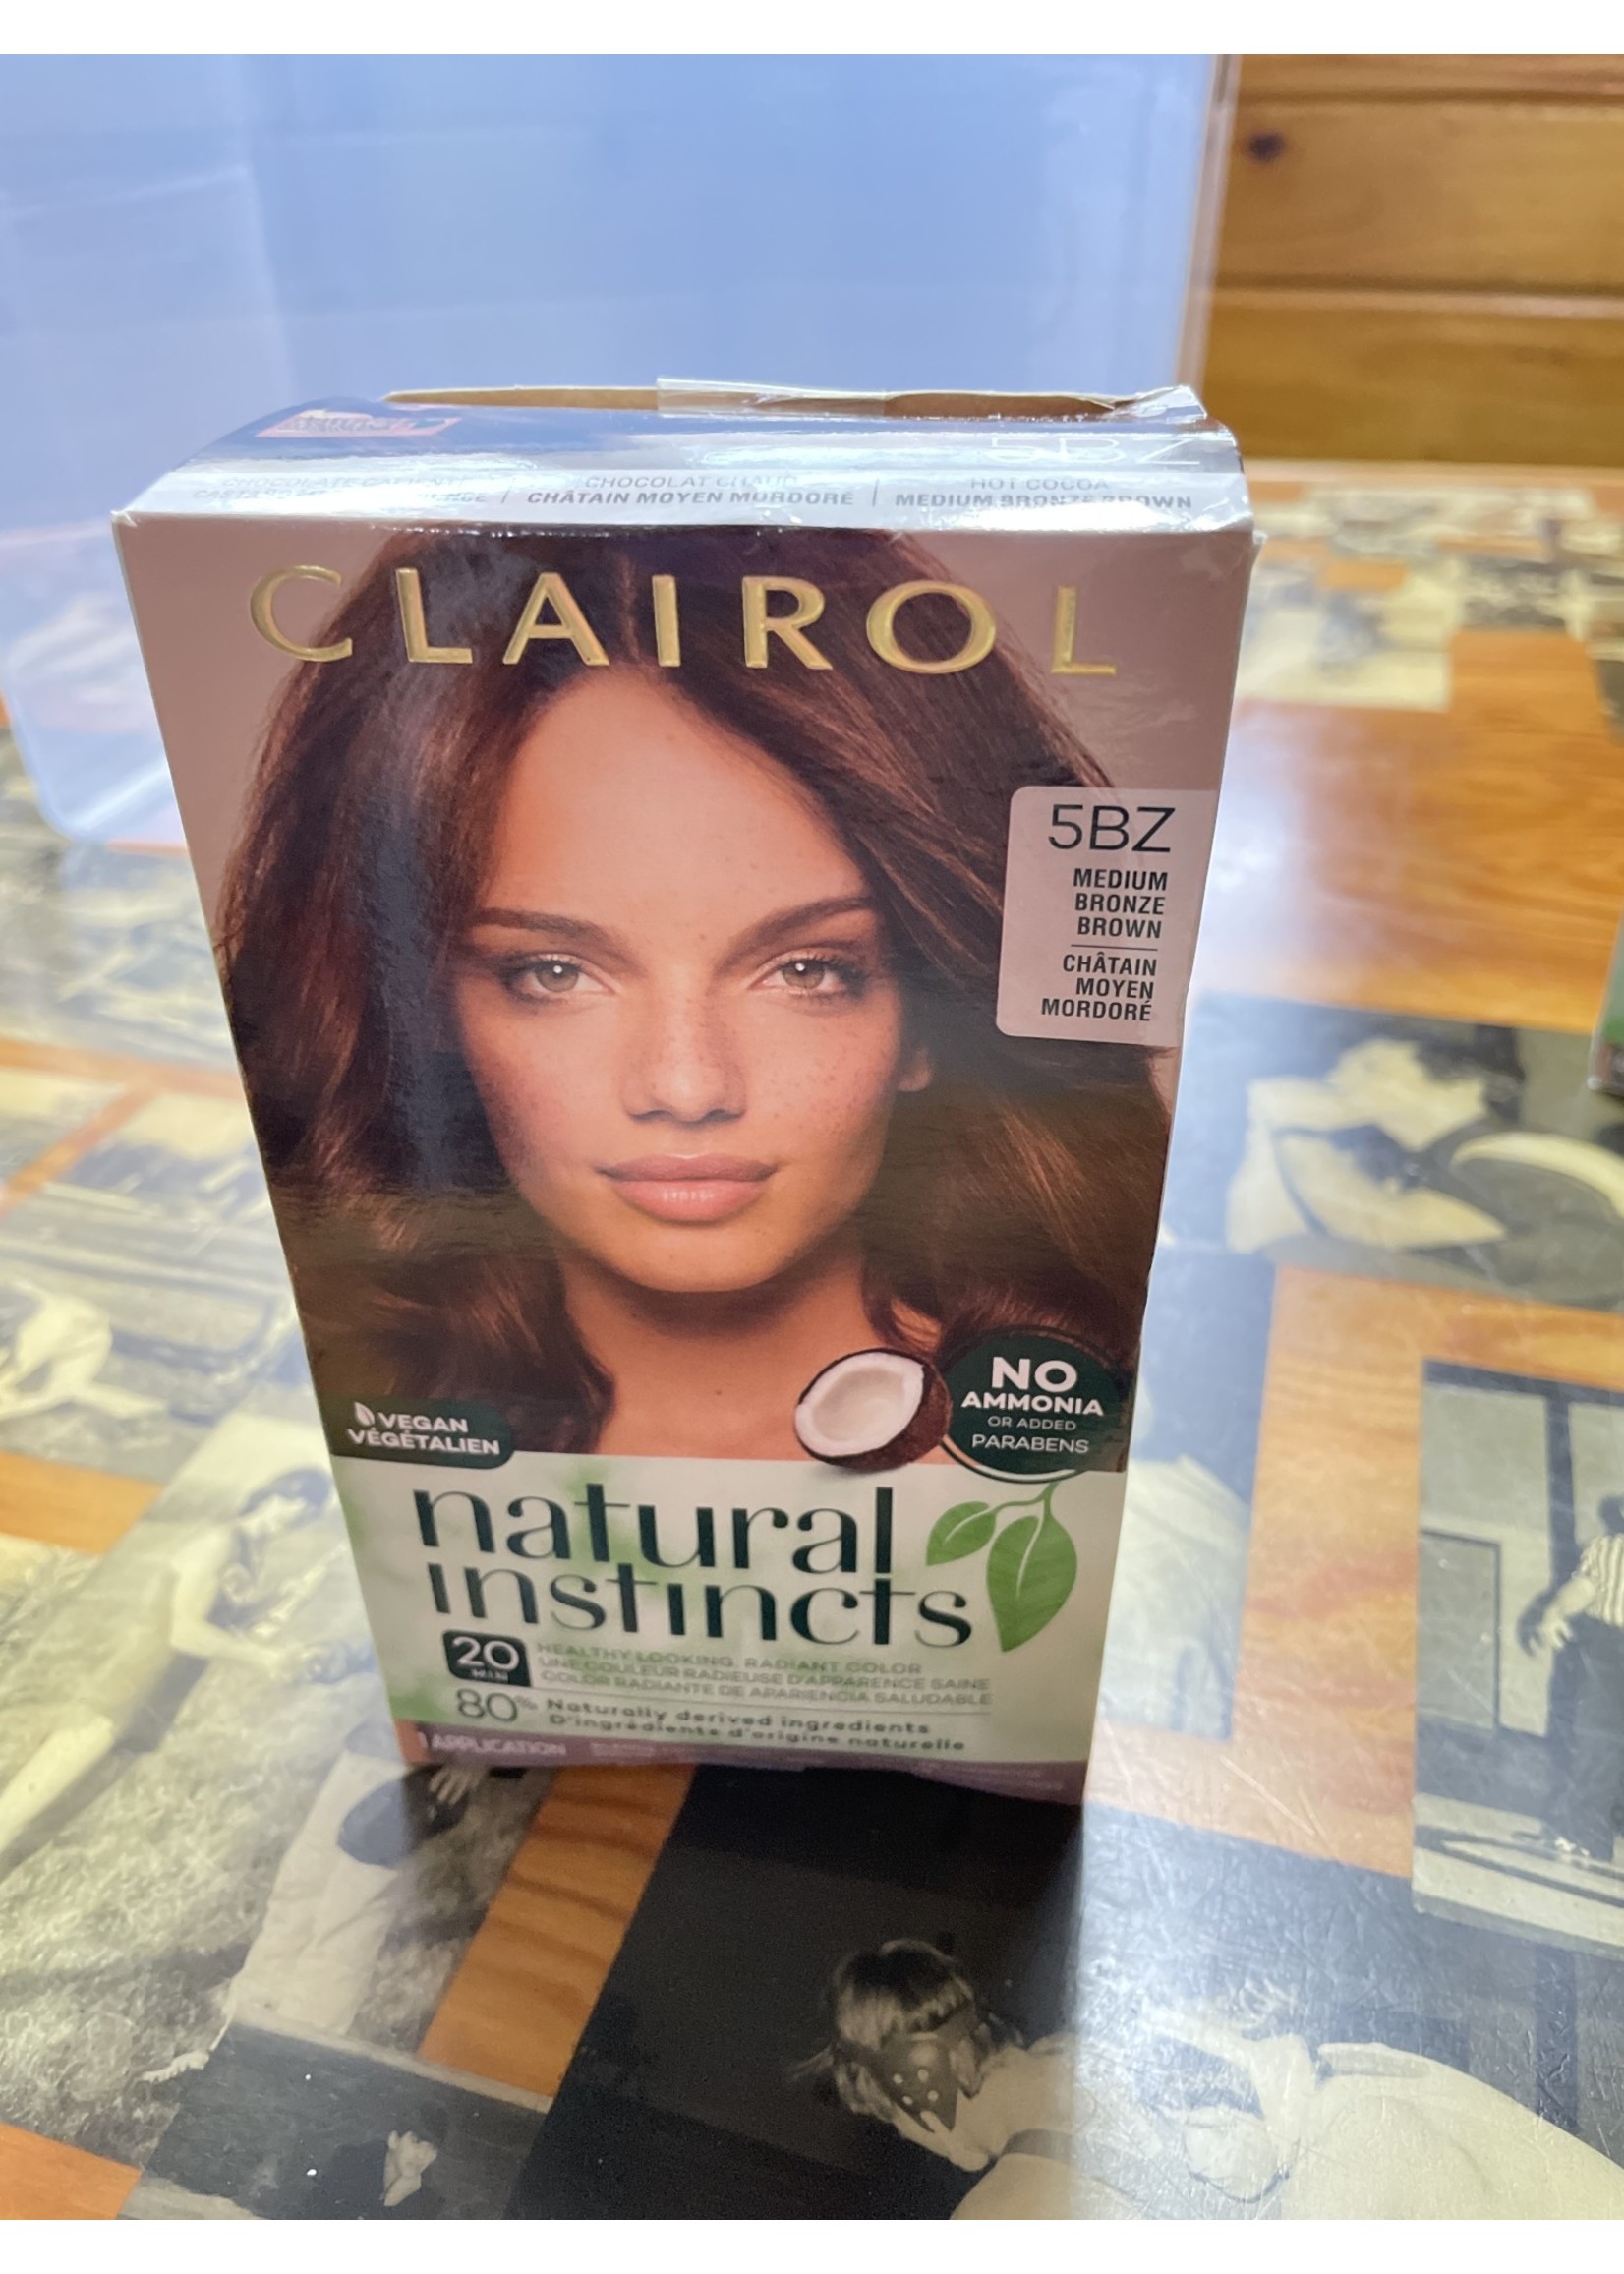 Clairol Natural Instincts Clairol Demi-Permanent Hairl Color - 5BZ Medium Bronze Brown, Hot Cocoa - 1 KIT